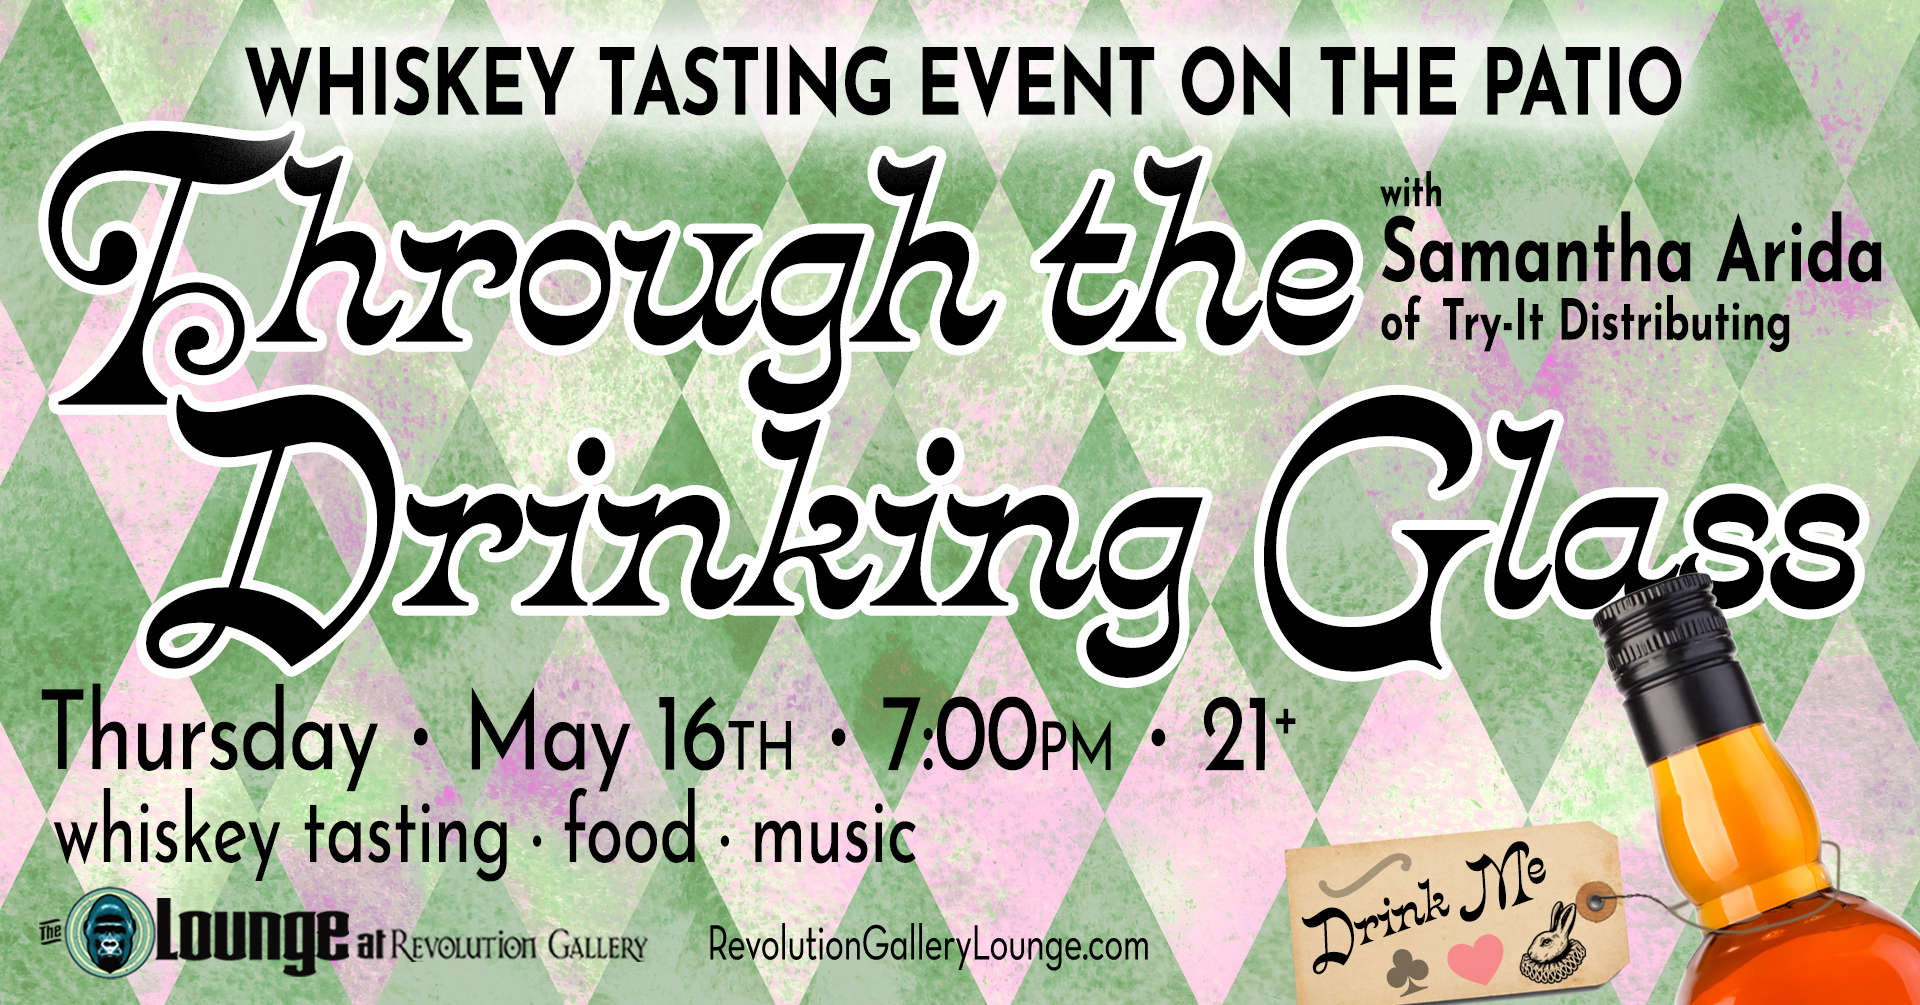 RGL_THROUGH_THE_DRINKING_GLASS_MAY16th_FB_BANNER_FINAL